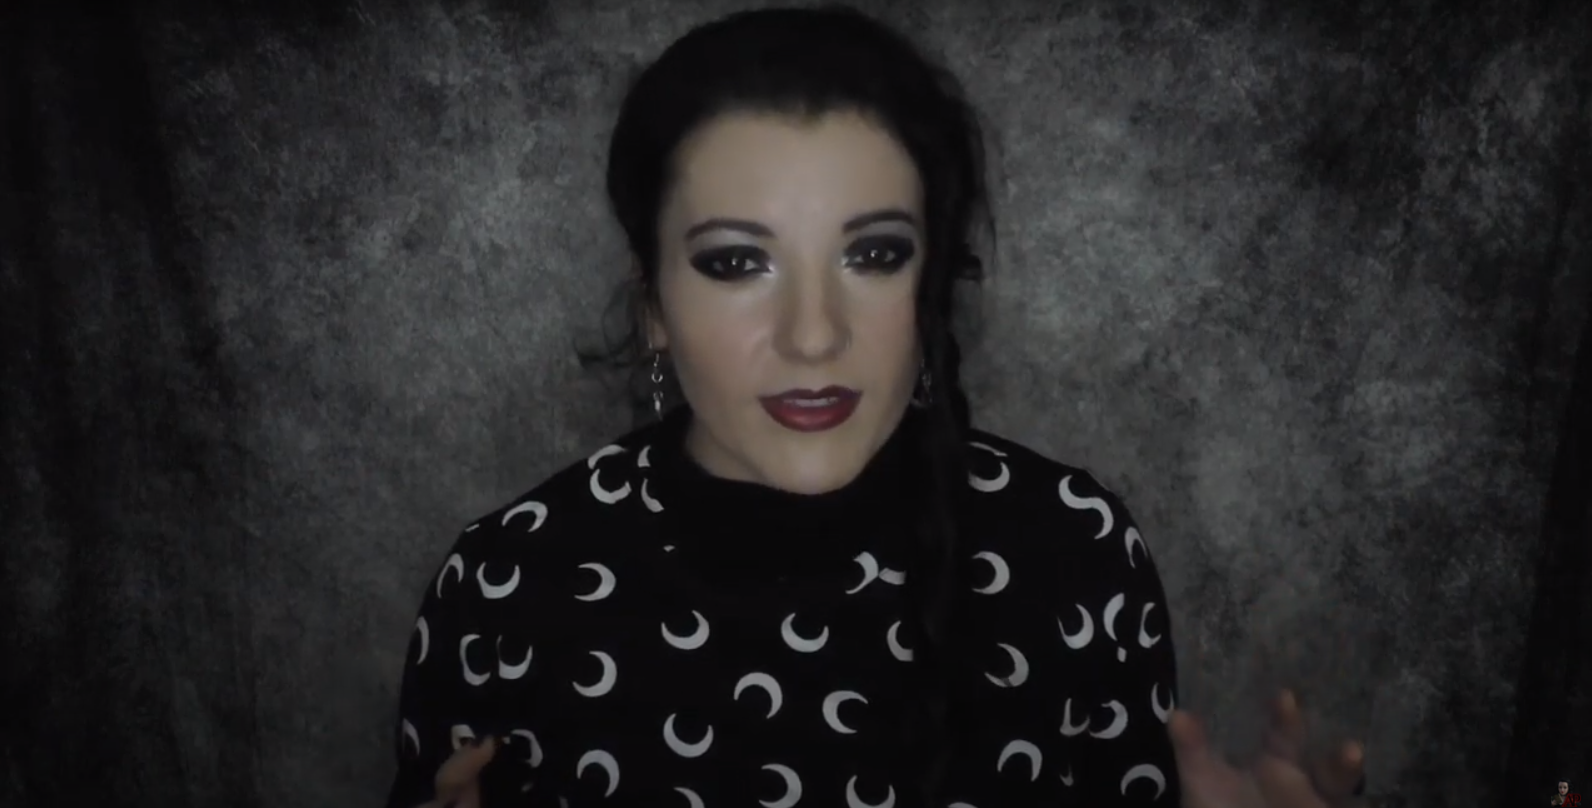 Angela Puca wearing a black shirt covered in crescent moons.